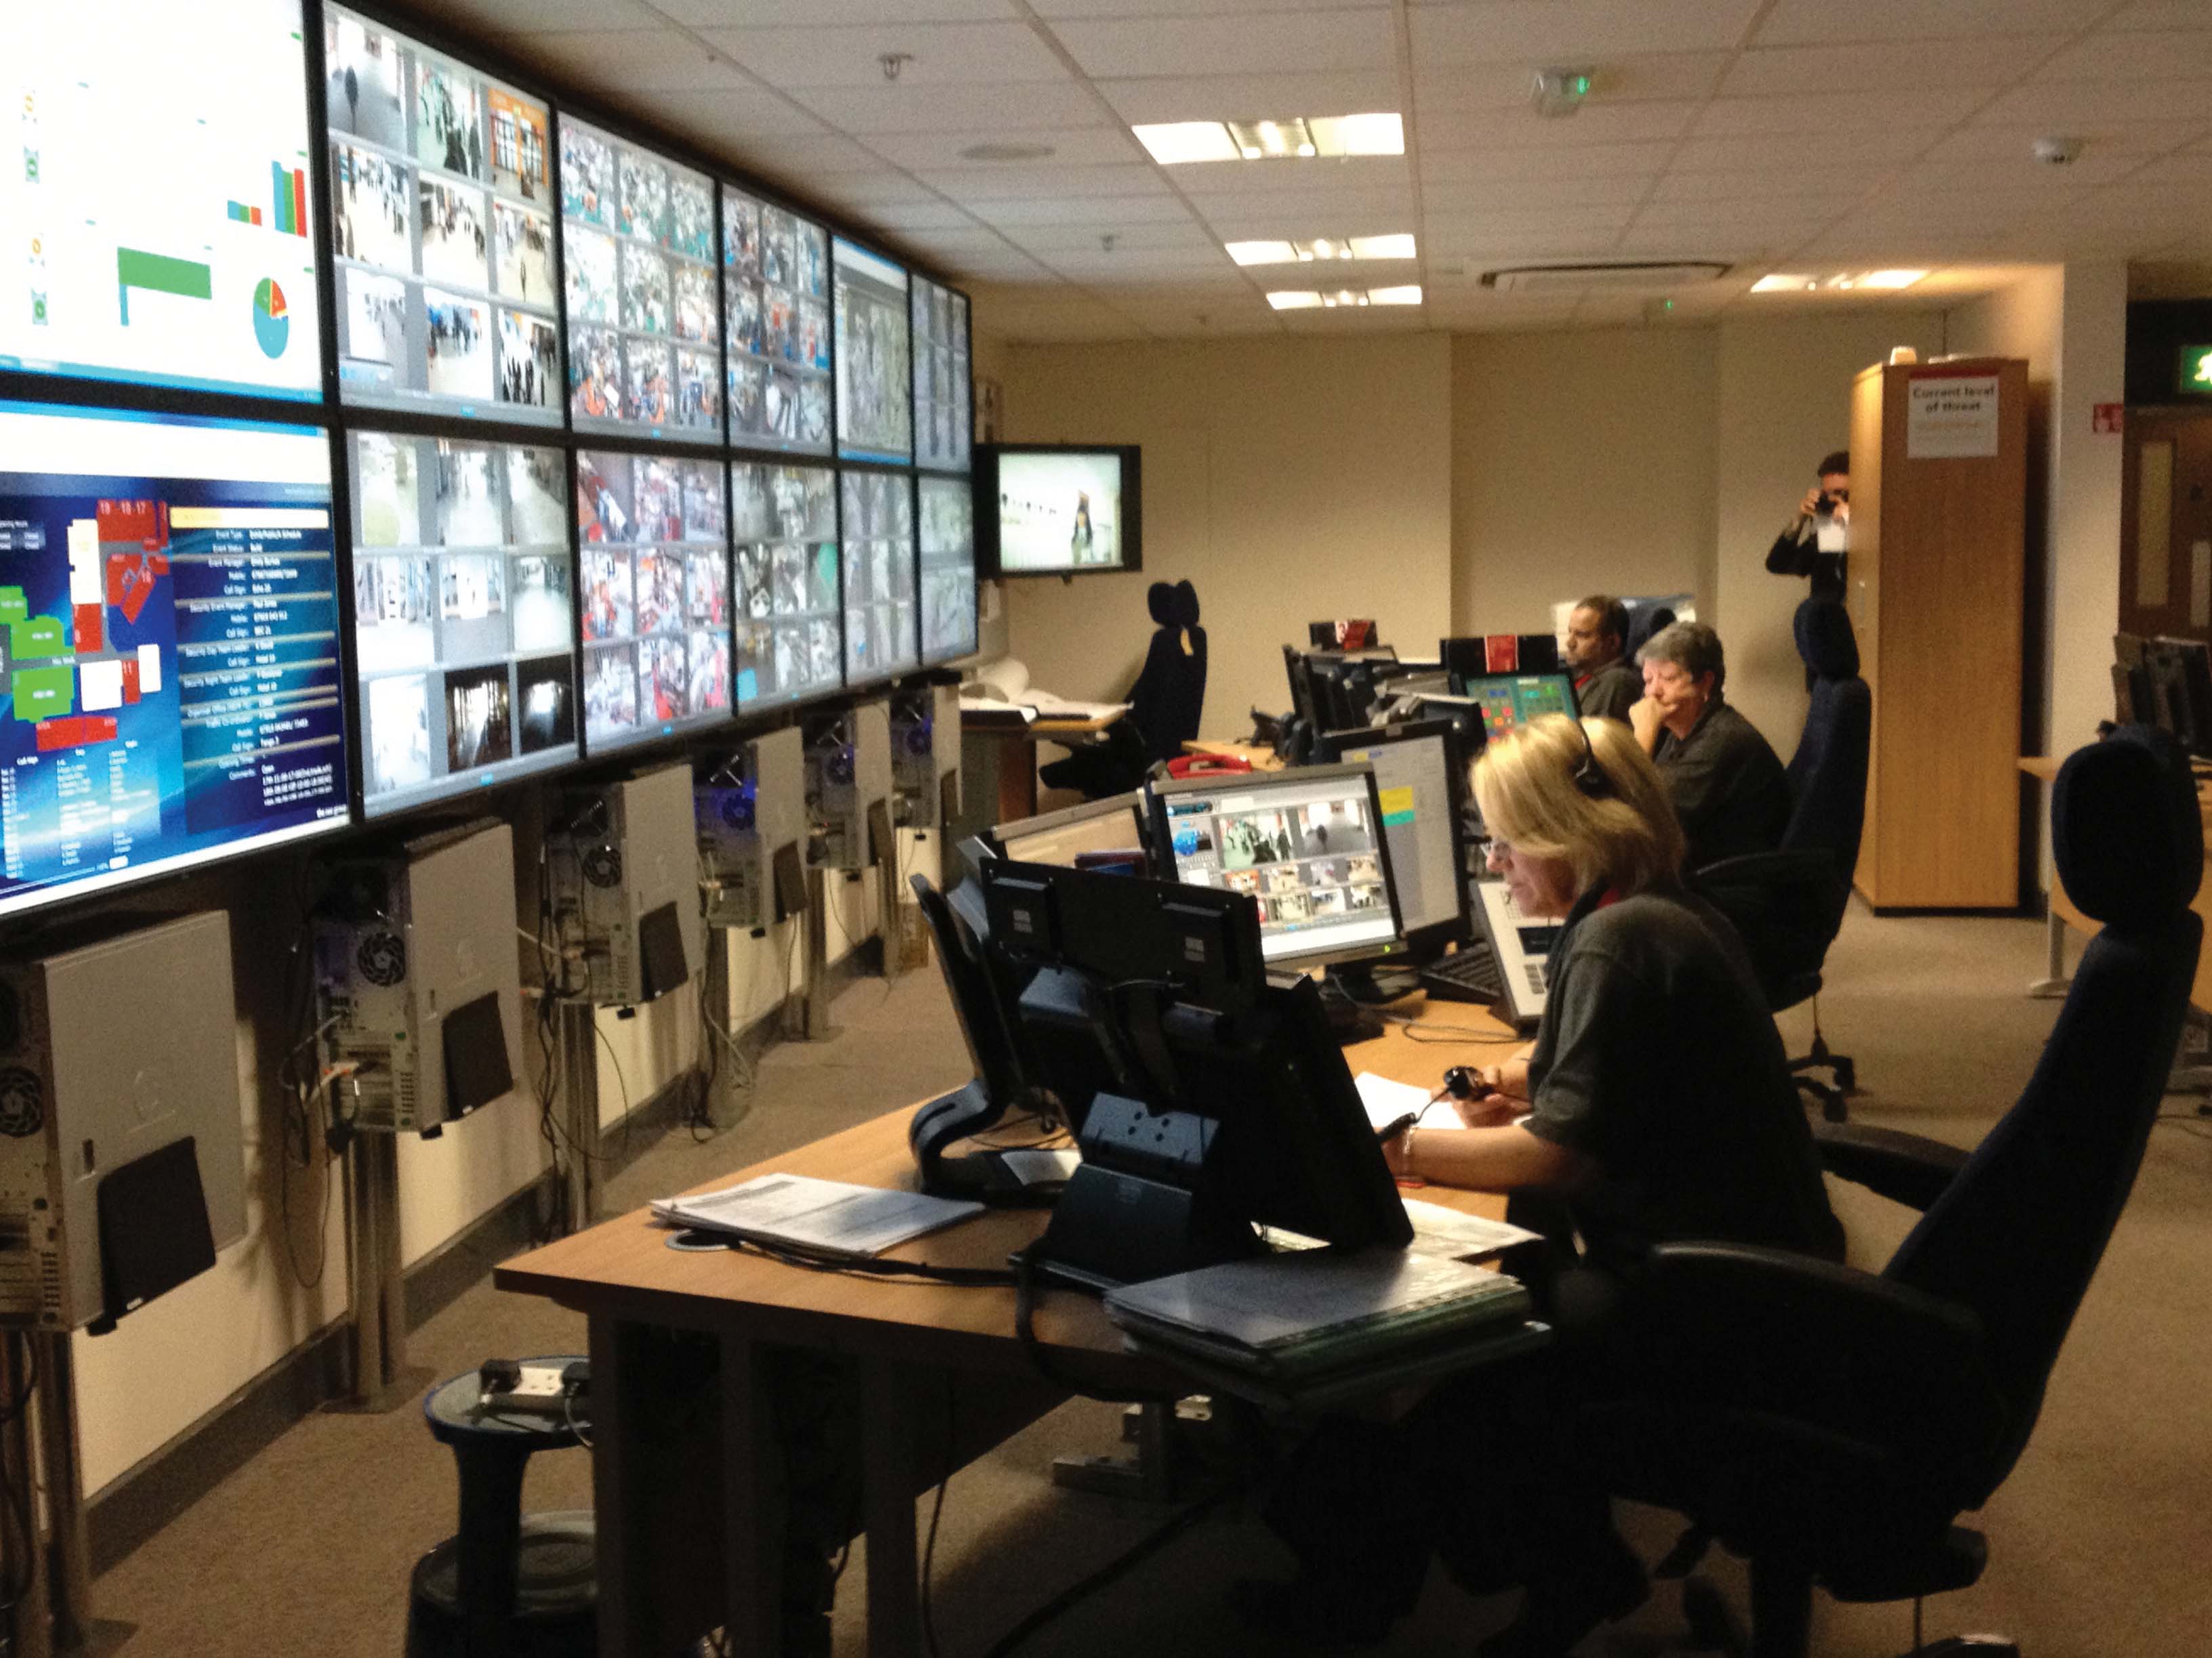 Control room staff can remotely monitor several sites